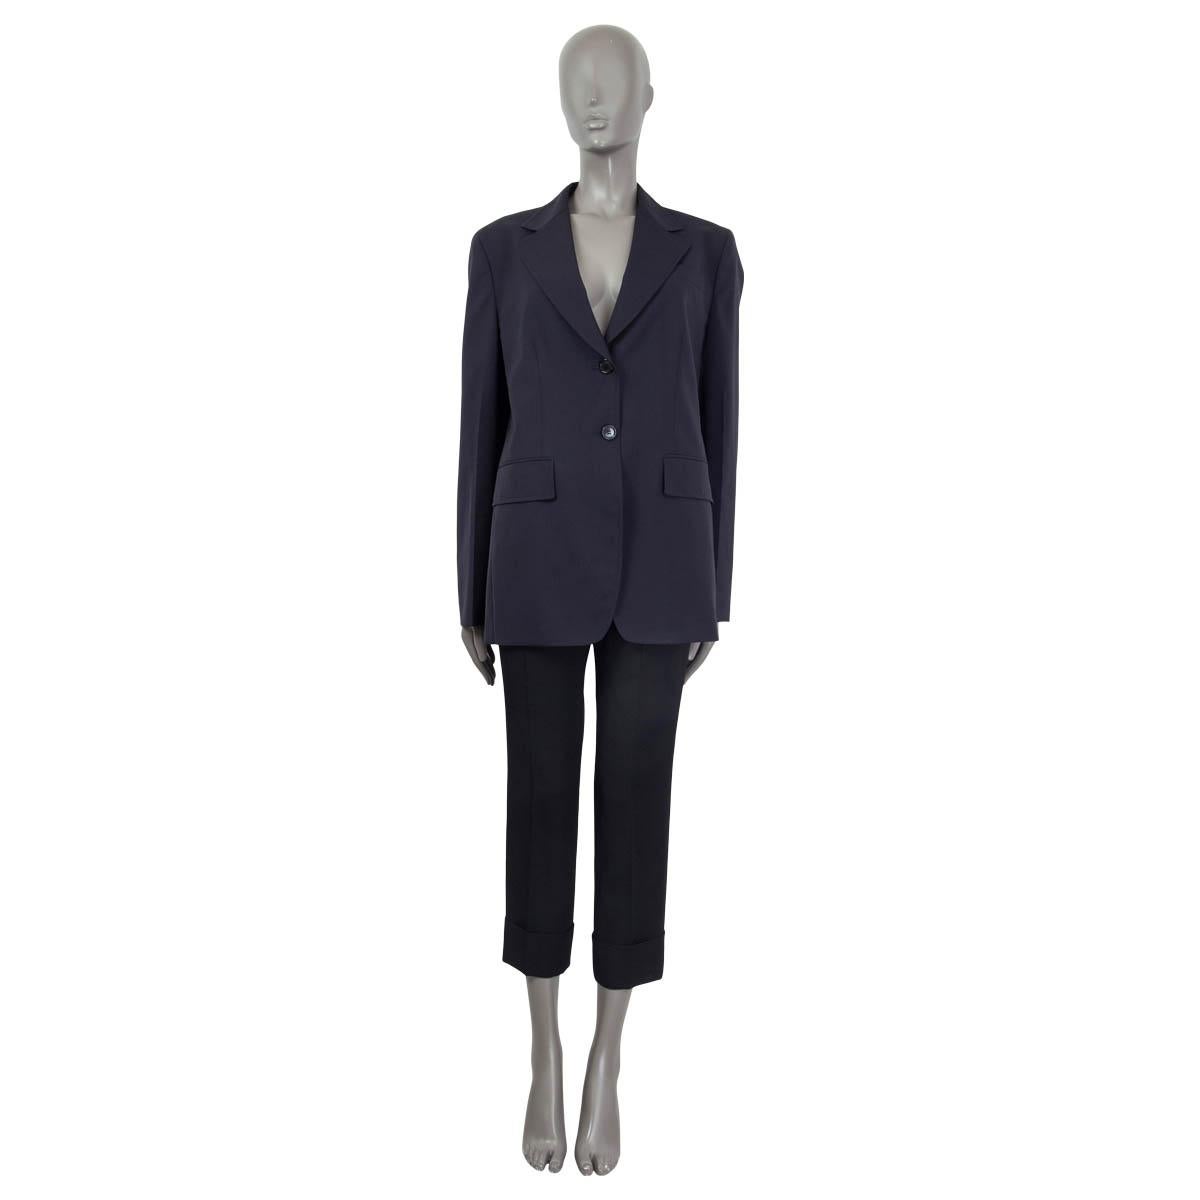 100% authentic Prada lightweight single breasted notched collar blazer in navy virgin wool (100%). Lined in navy polyester (100%). Opens with two buttons in the front. Features two front patch pockets. Has been worn and is in excellent